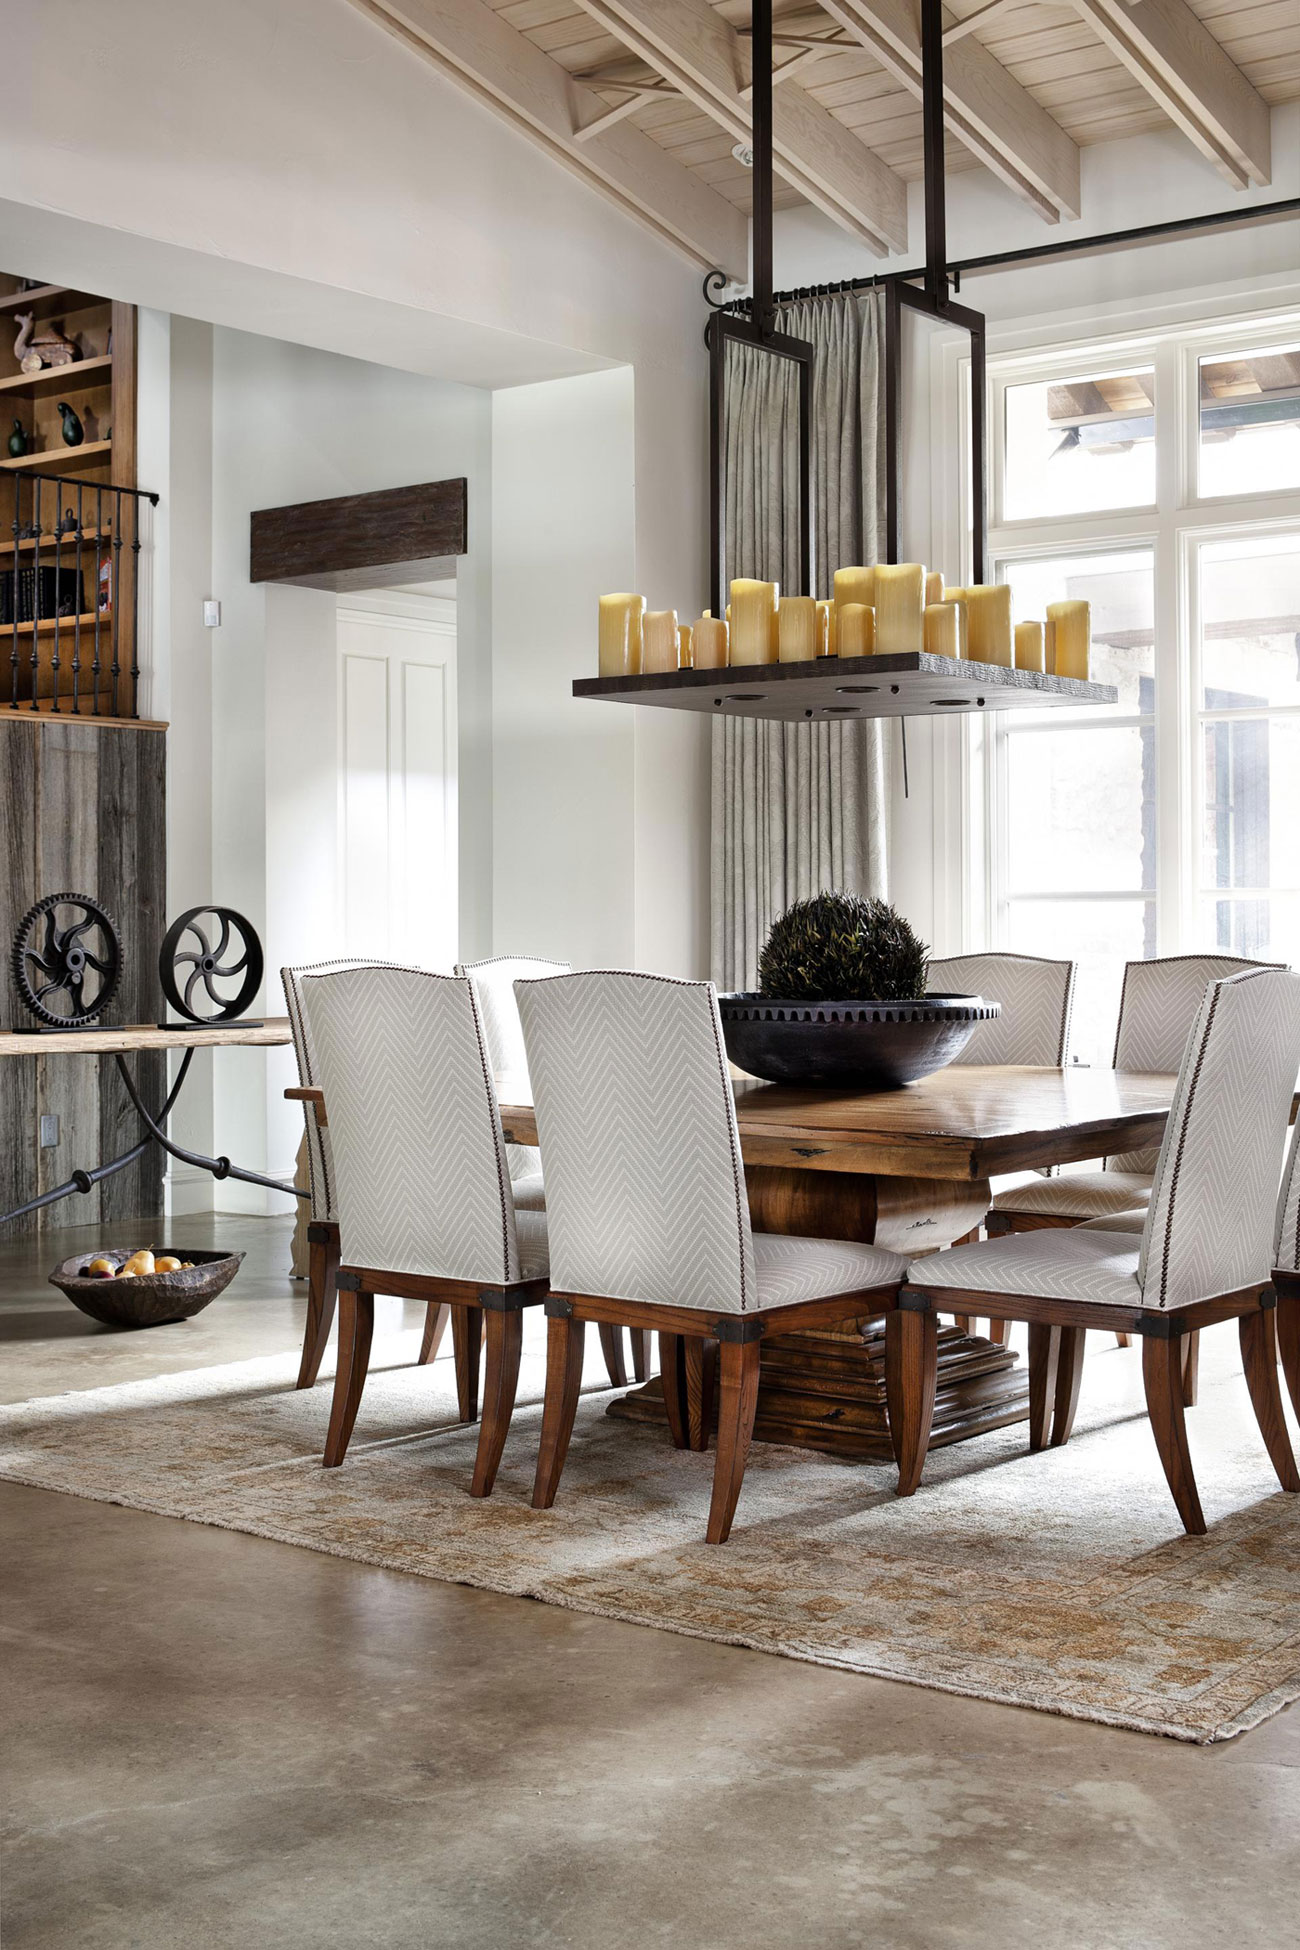 Dining Room : Chairs Classic Furniture Round Tables Decoration ...